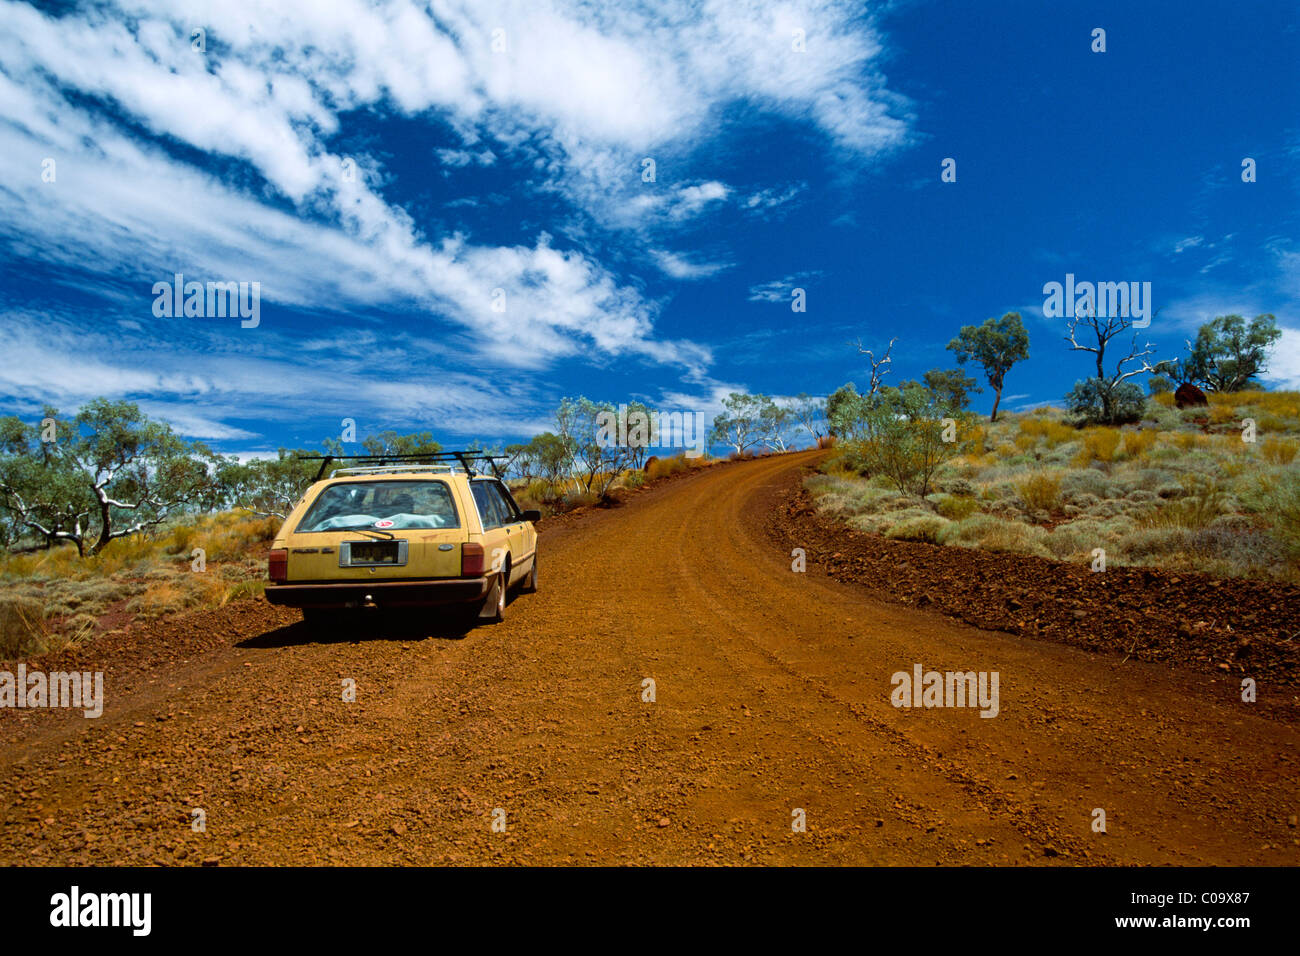 Car driving on a red dirt road in the Outback, Western Australia, Australia Stock Photo